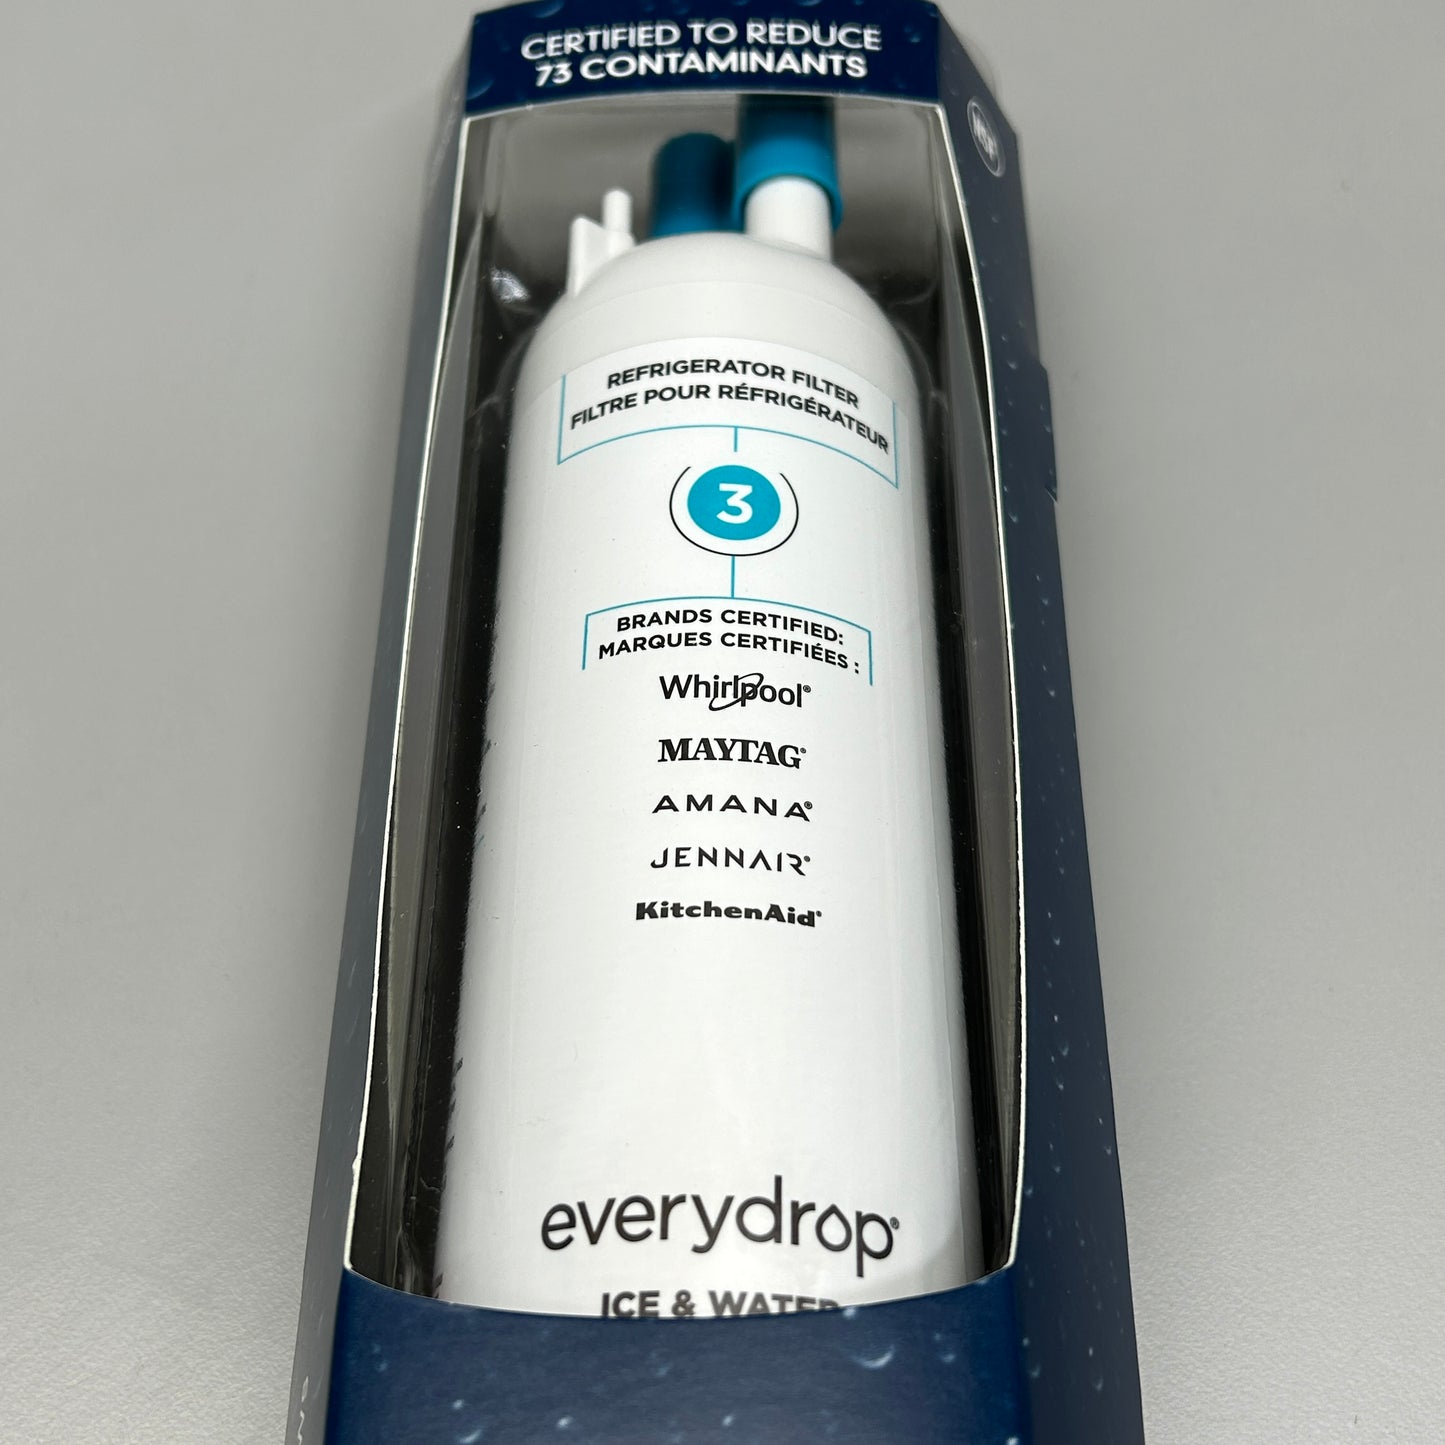 EVERYDROP 2-PACK! Refrigerator Ice & Water Filter 3, 6 Months (New)